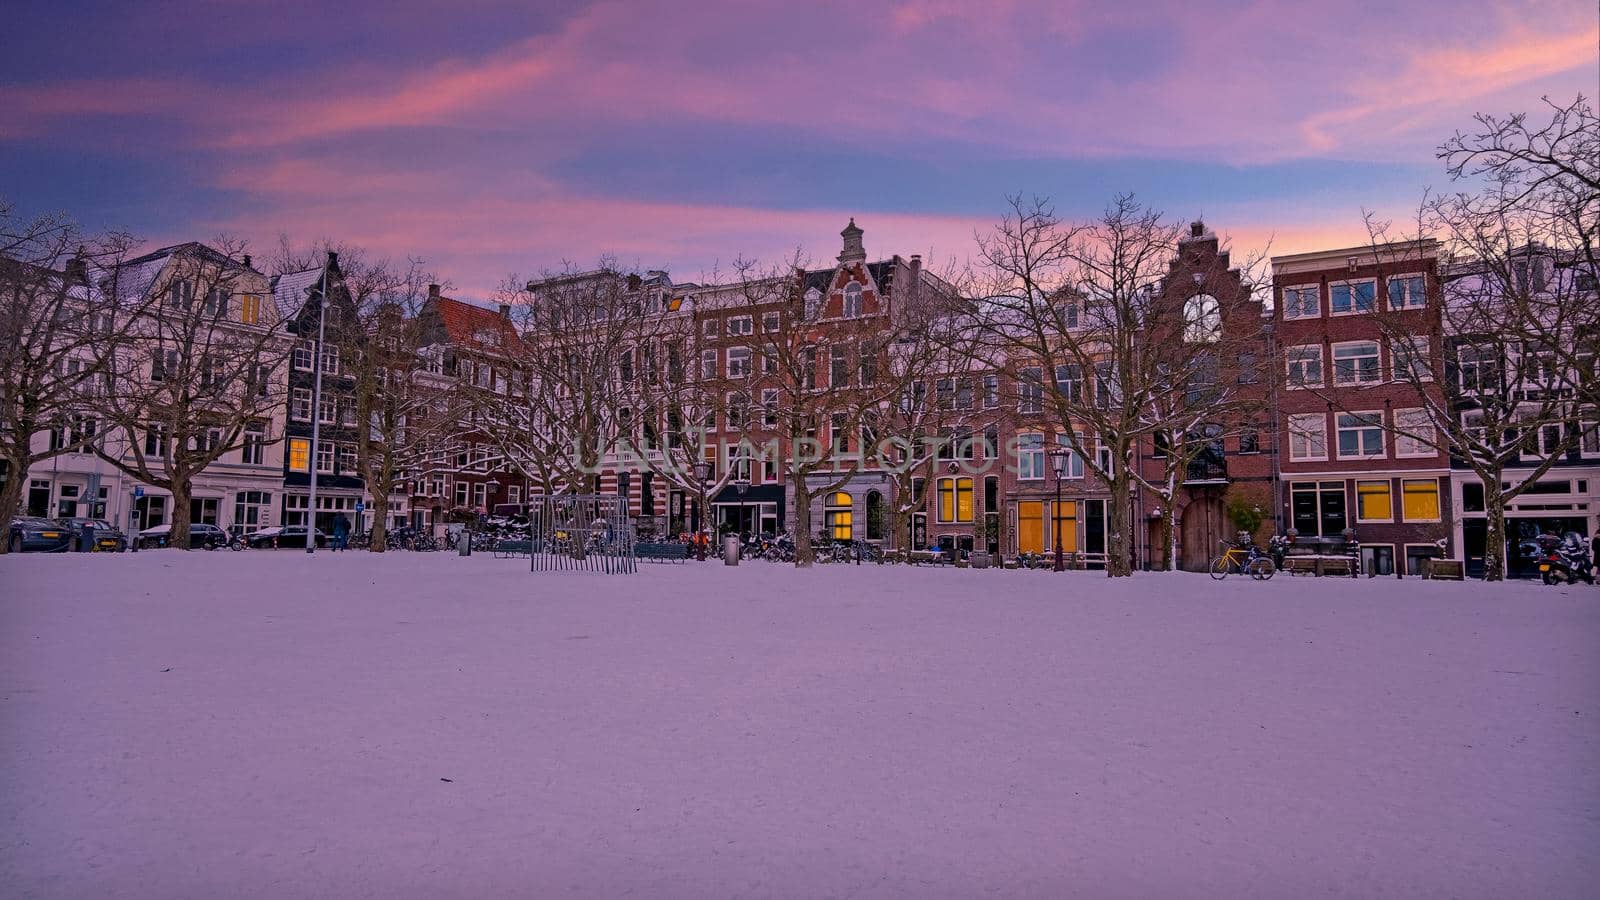 City scenic from a snowy Amsterdm in winter in the Netherlands by devy